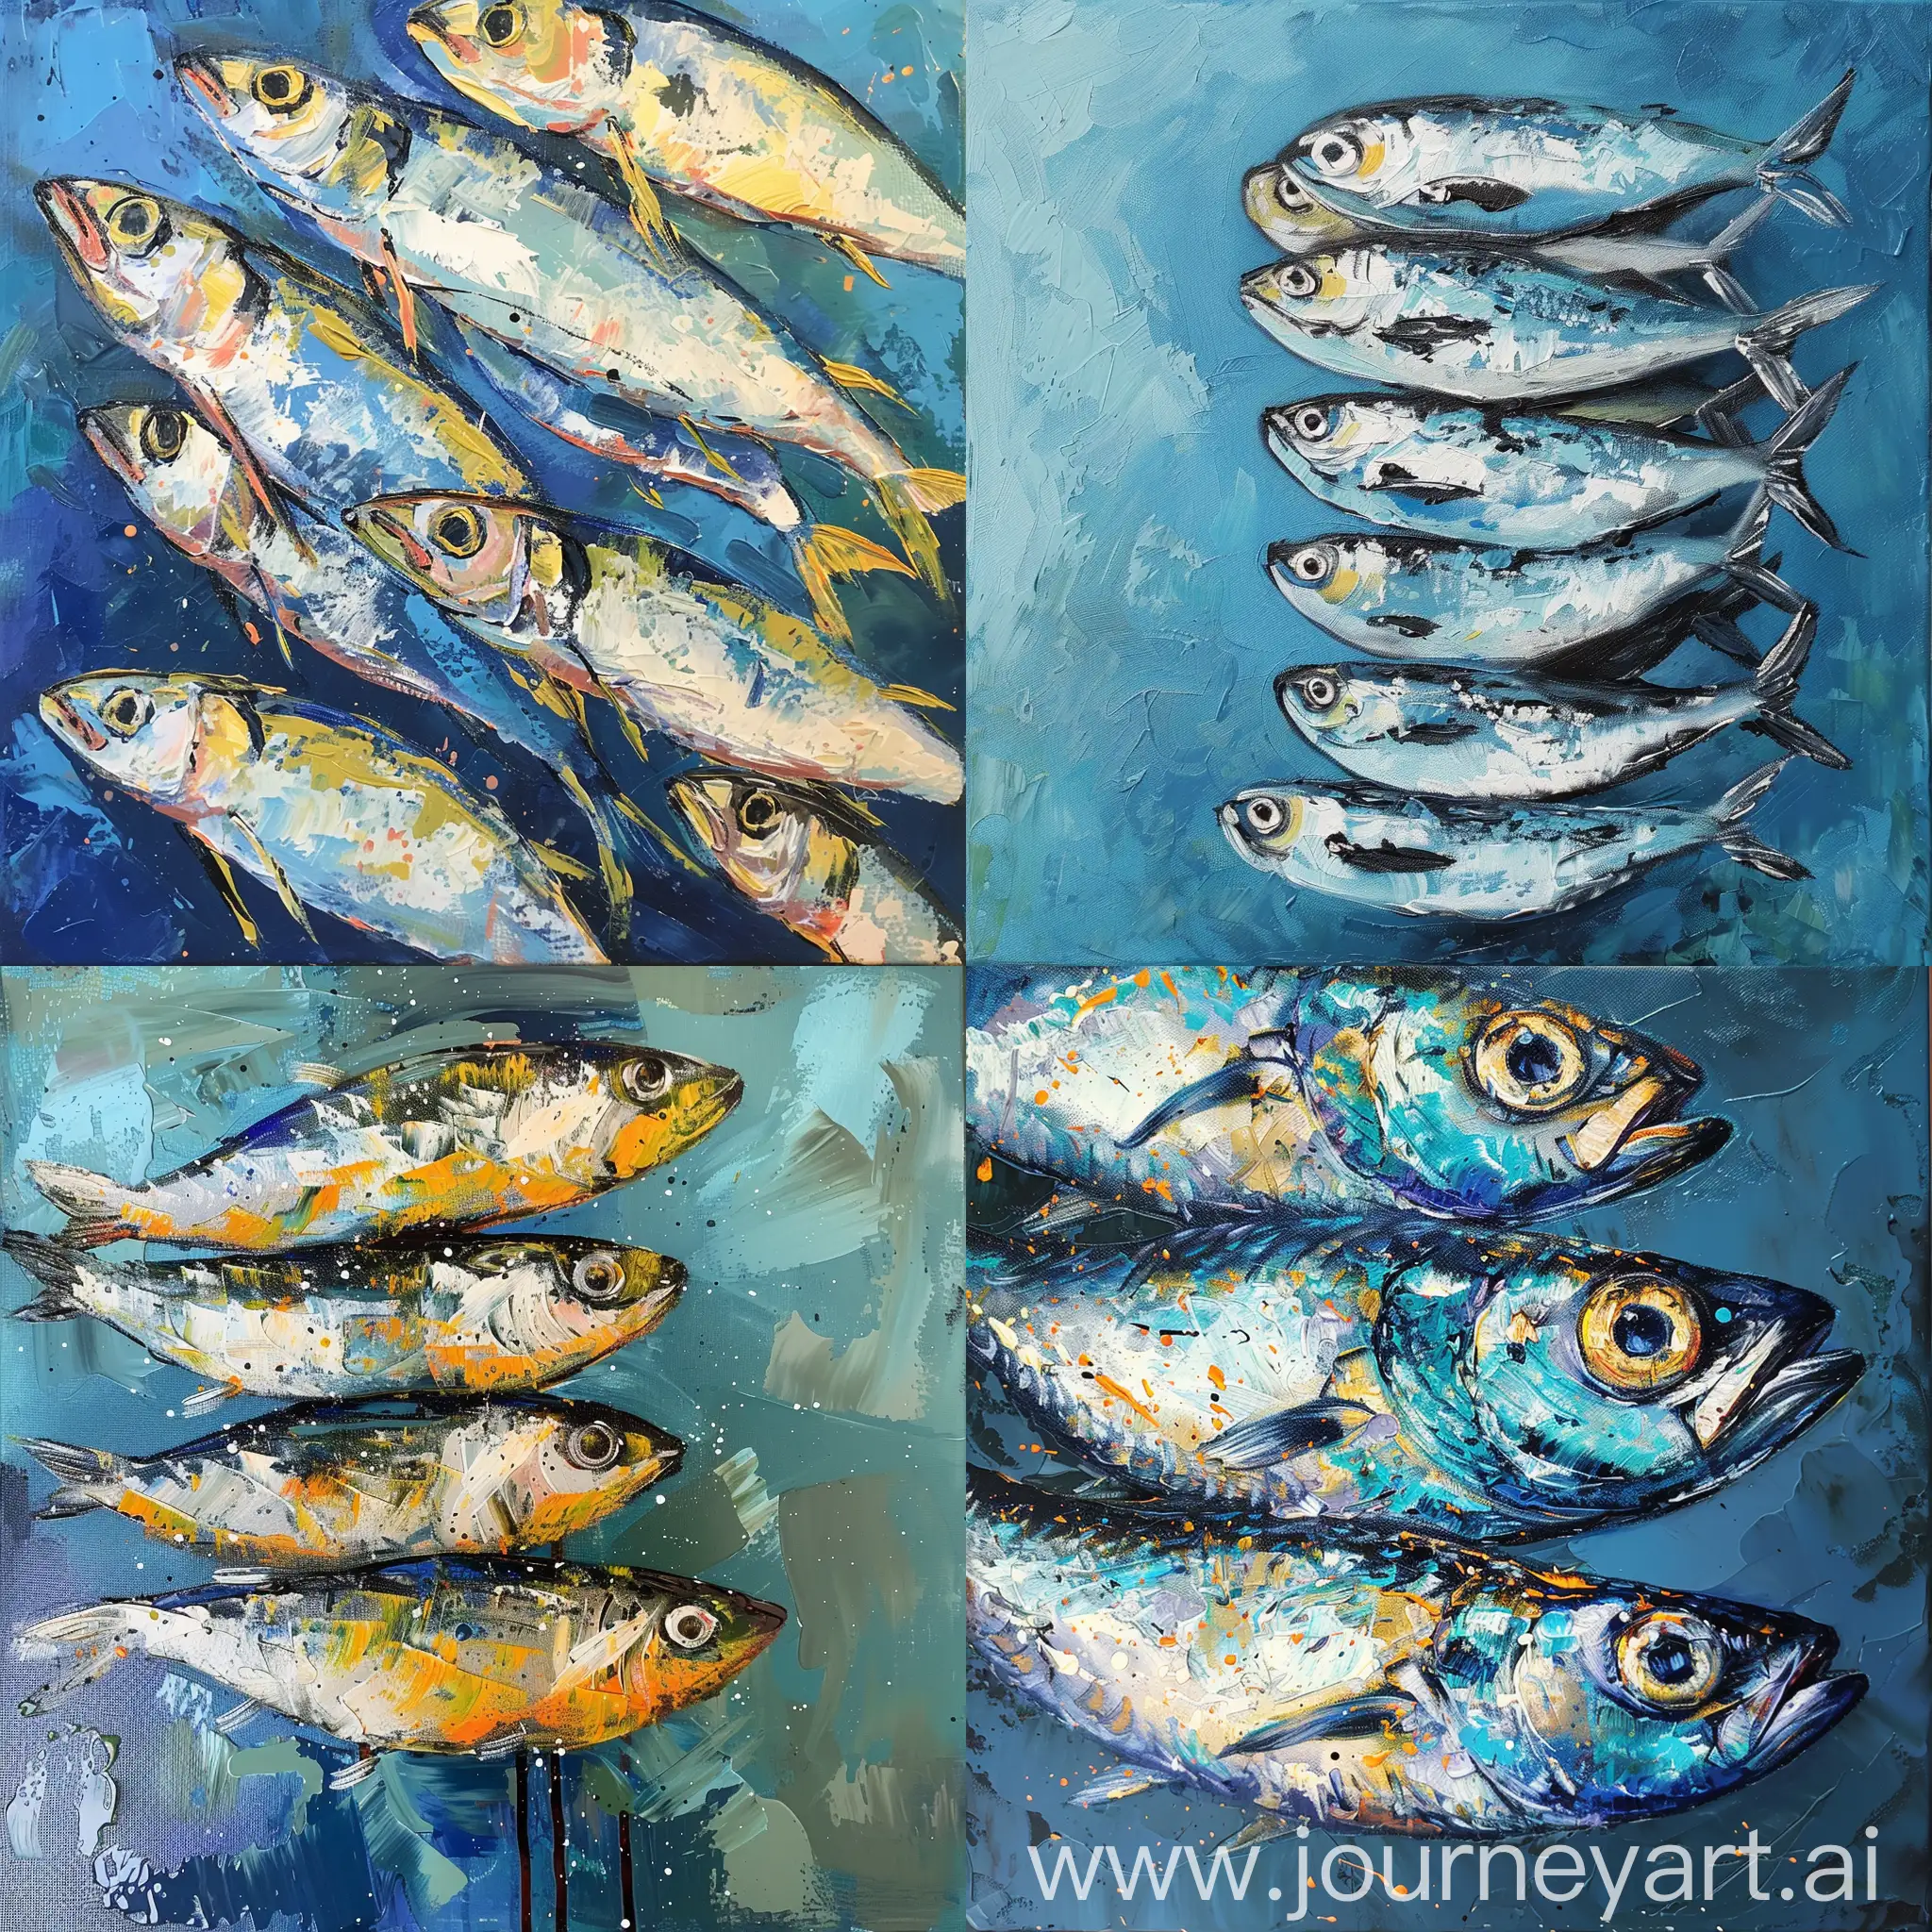 Vibrant-Acrylic-Painting-of-Sardines-in-a-Minimalistic-Style